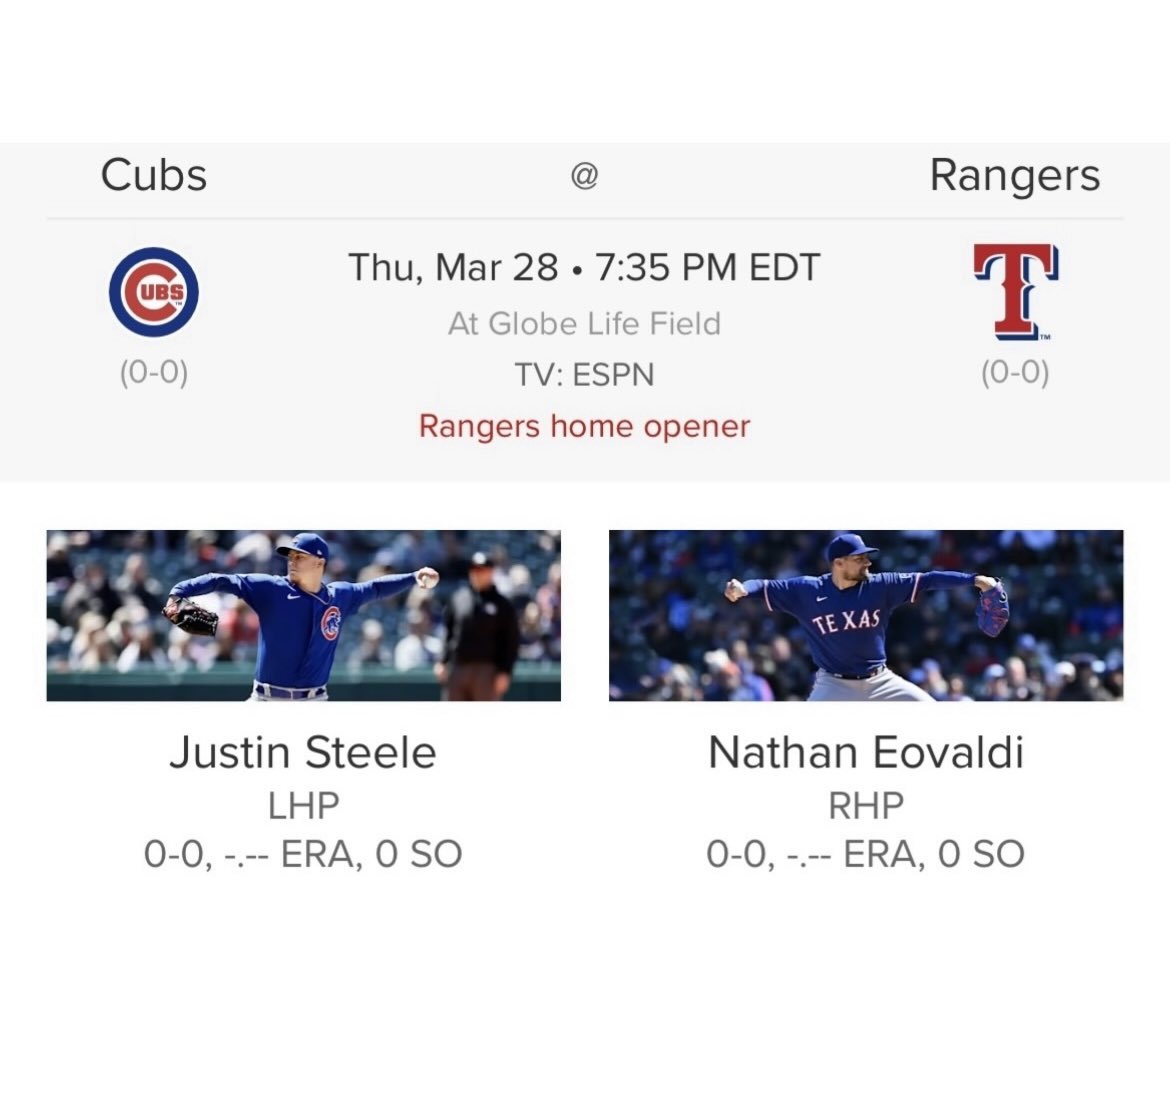 🚨RP!!! GET OPENING DAY PLAY!!! 

💵THE MLB SEASON STARTS THIS THURSDAY LAST SEASON I HIT AT 61% ON OVER 300 LEGIT STRAIGHT BETS. 

⚾️ANYONE WHO REPOST THIS WILL GET MY FIRST BET OF THE SEASON IN #NextStartsHere 🆚#StraightUpTexas SENT TO THEM 6-6:30pmET ON THURSDAY 

📺ESPN